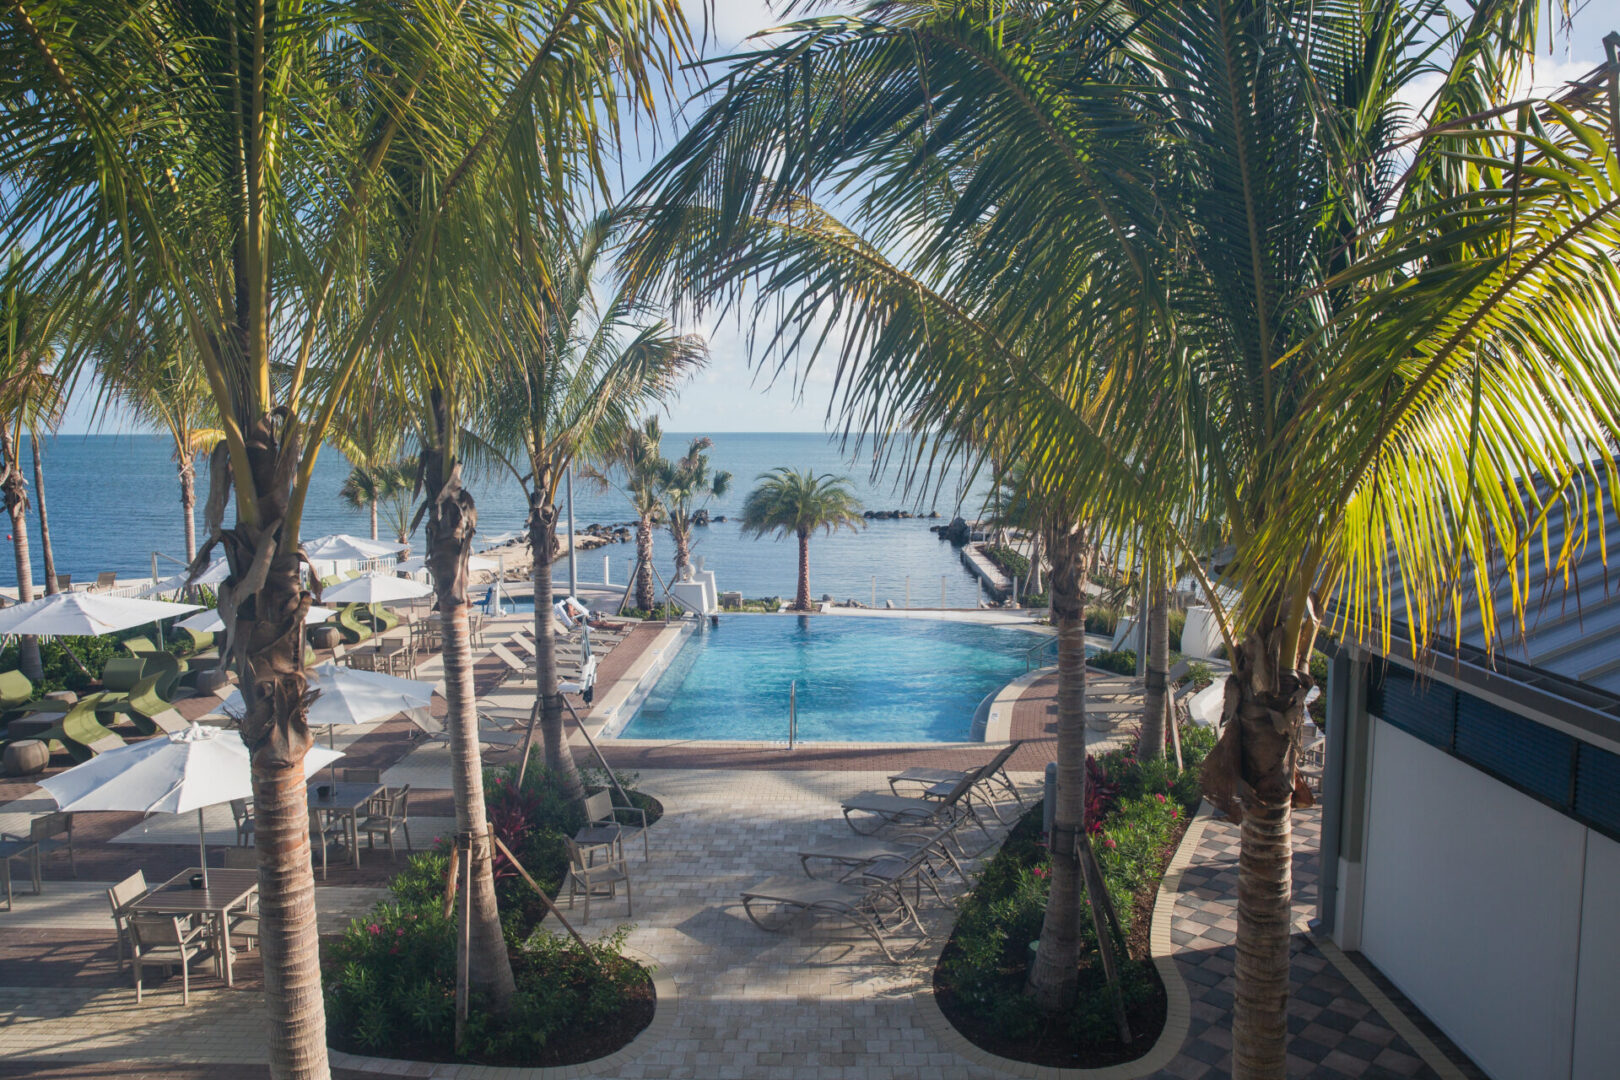 A pool surrounded by palm trees and an ocean.